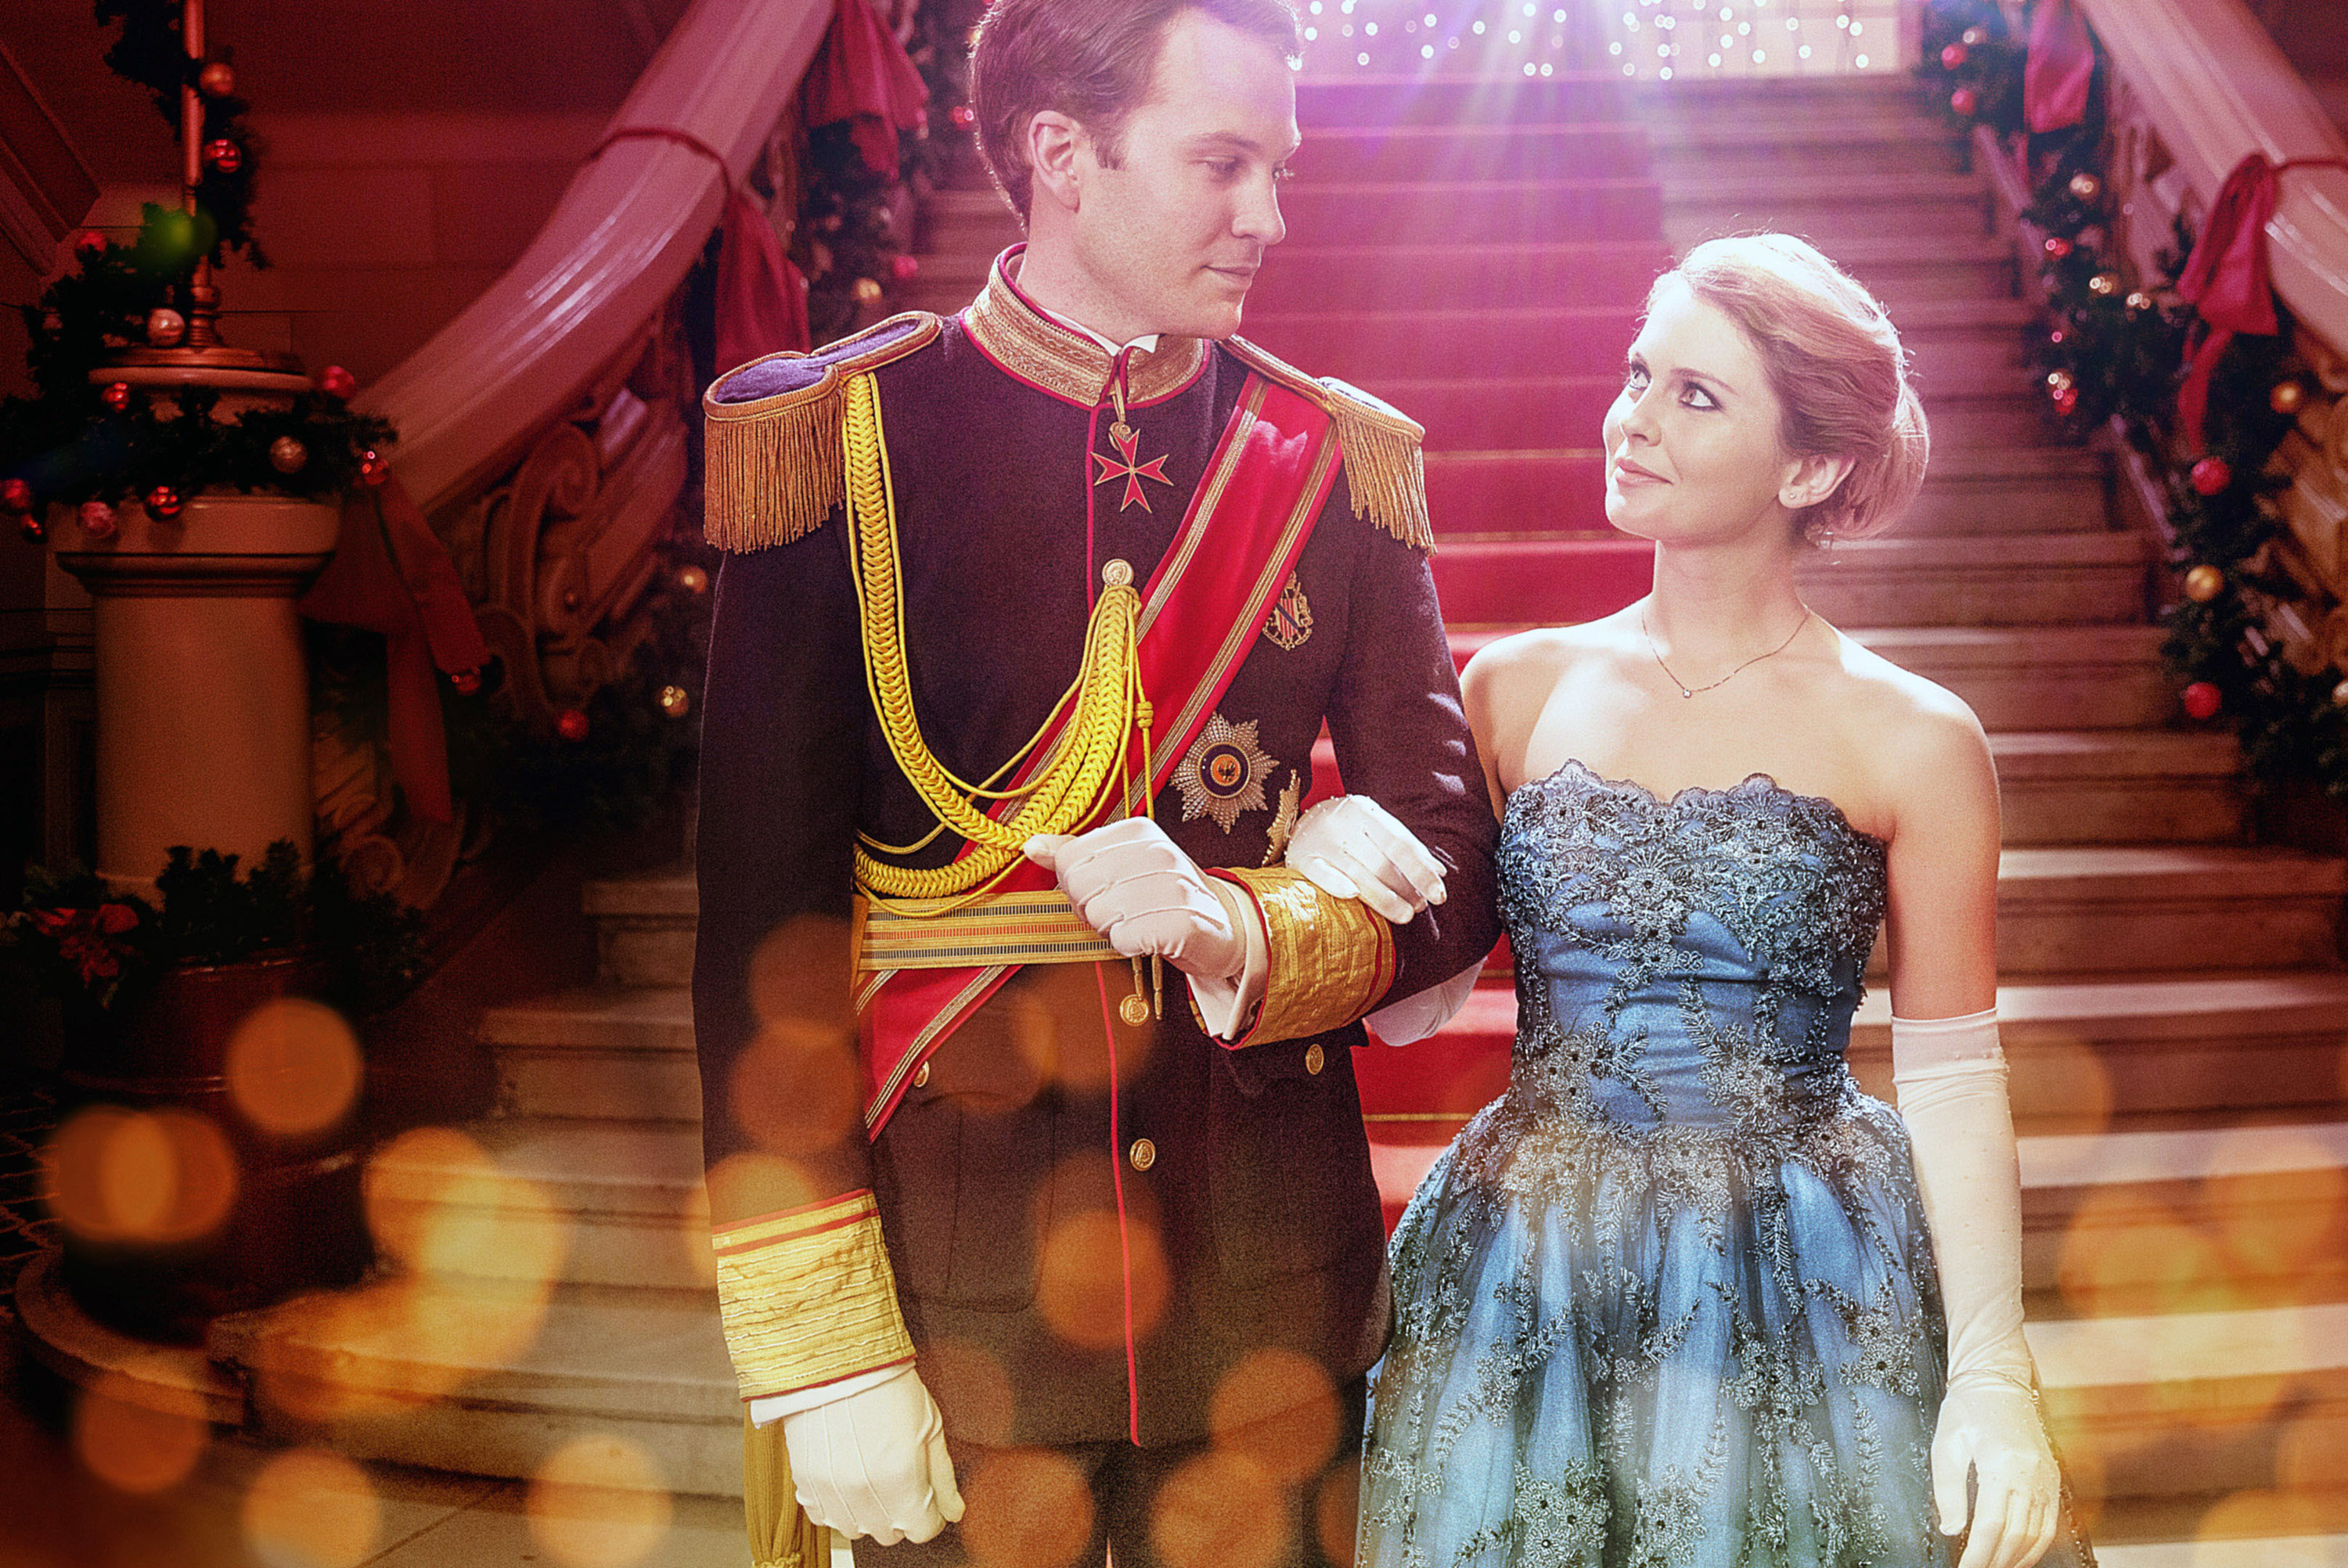 Ben Lamb, Rose McIver in A Christmas Prince